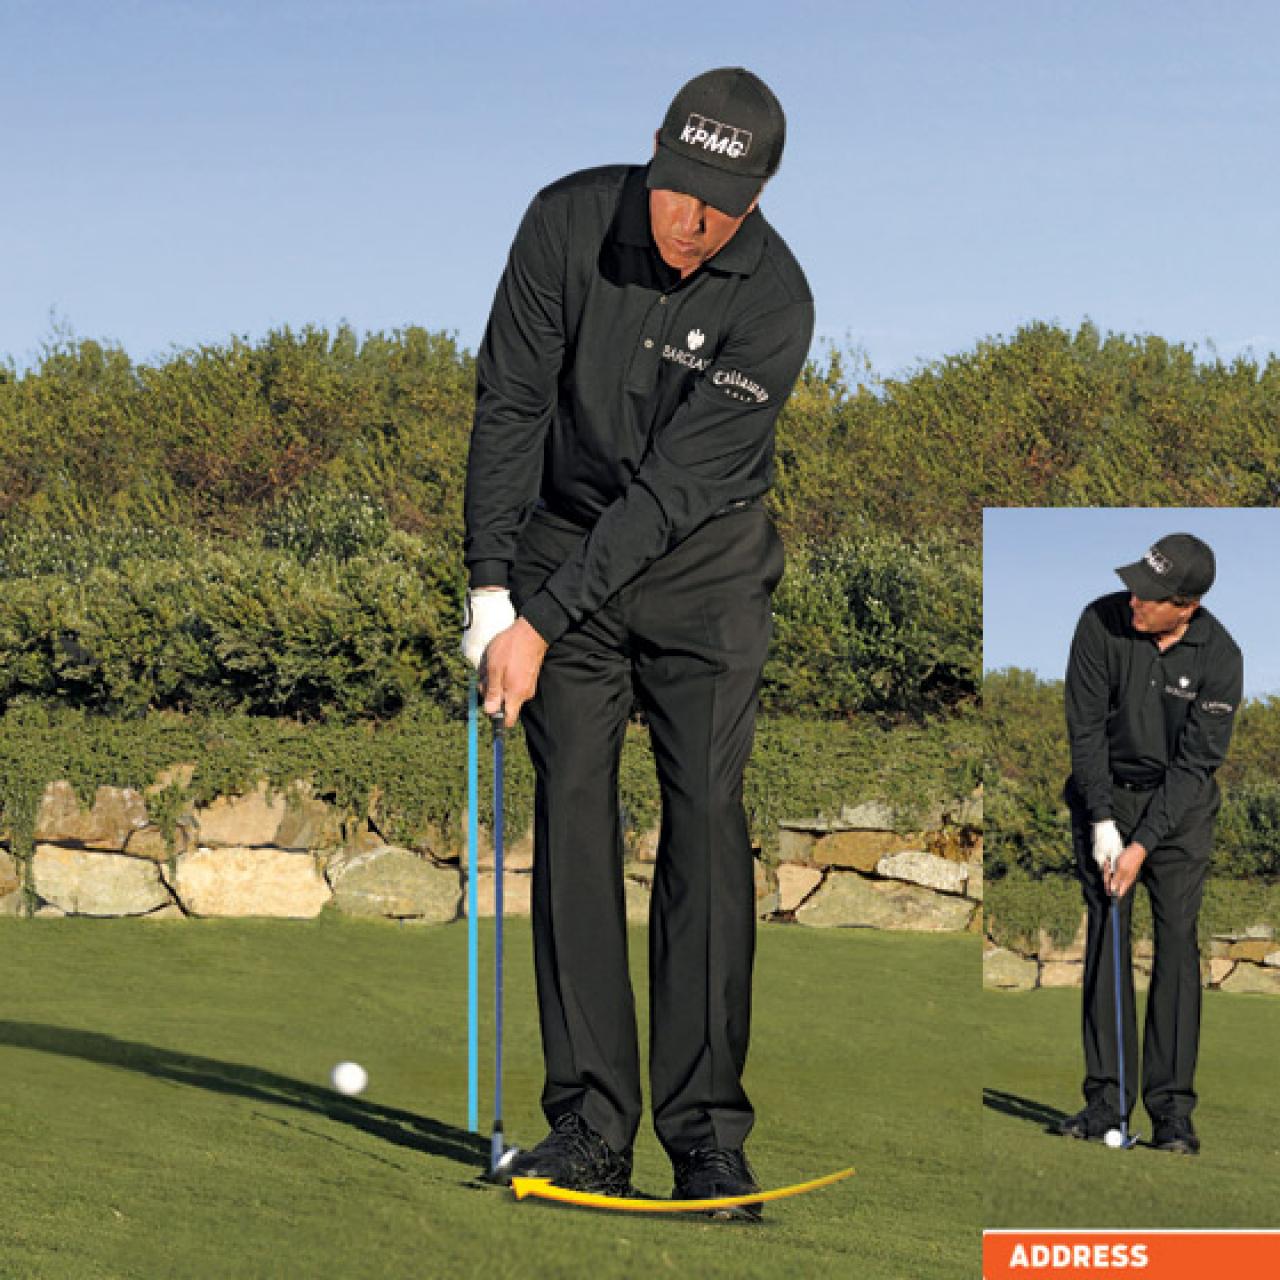 Phil Mickelson: How To Hit 2 Basic Pitches and Chips | How To | Golf Digest